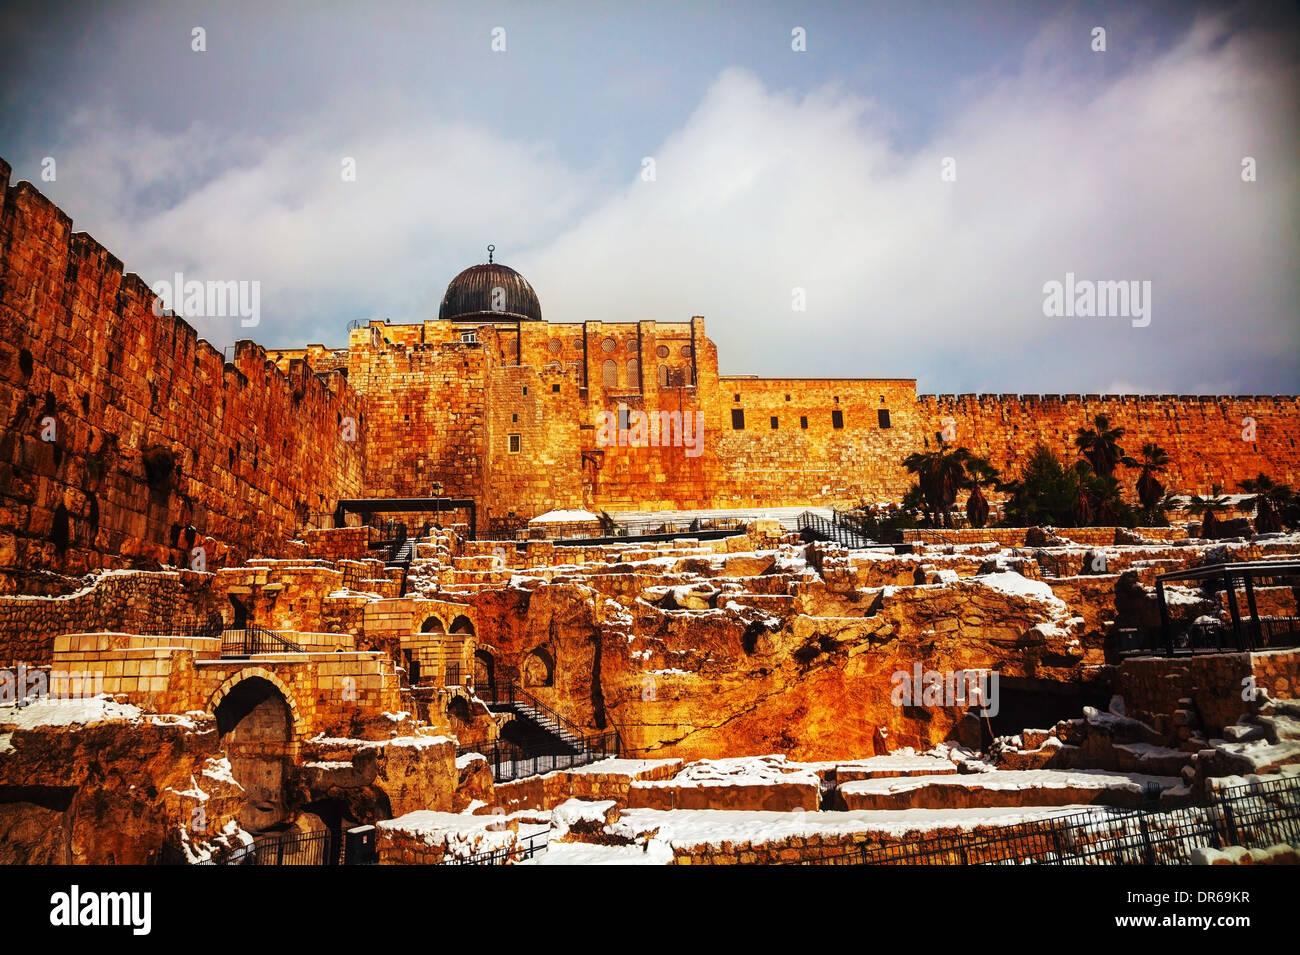 Ophel ruins in the Old city of Jerusalem, Israel Stock Photo